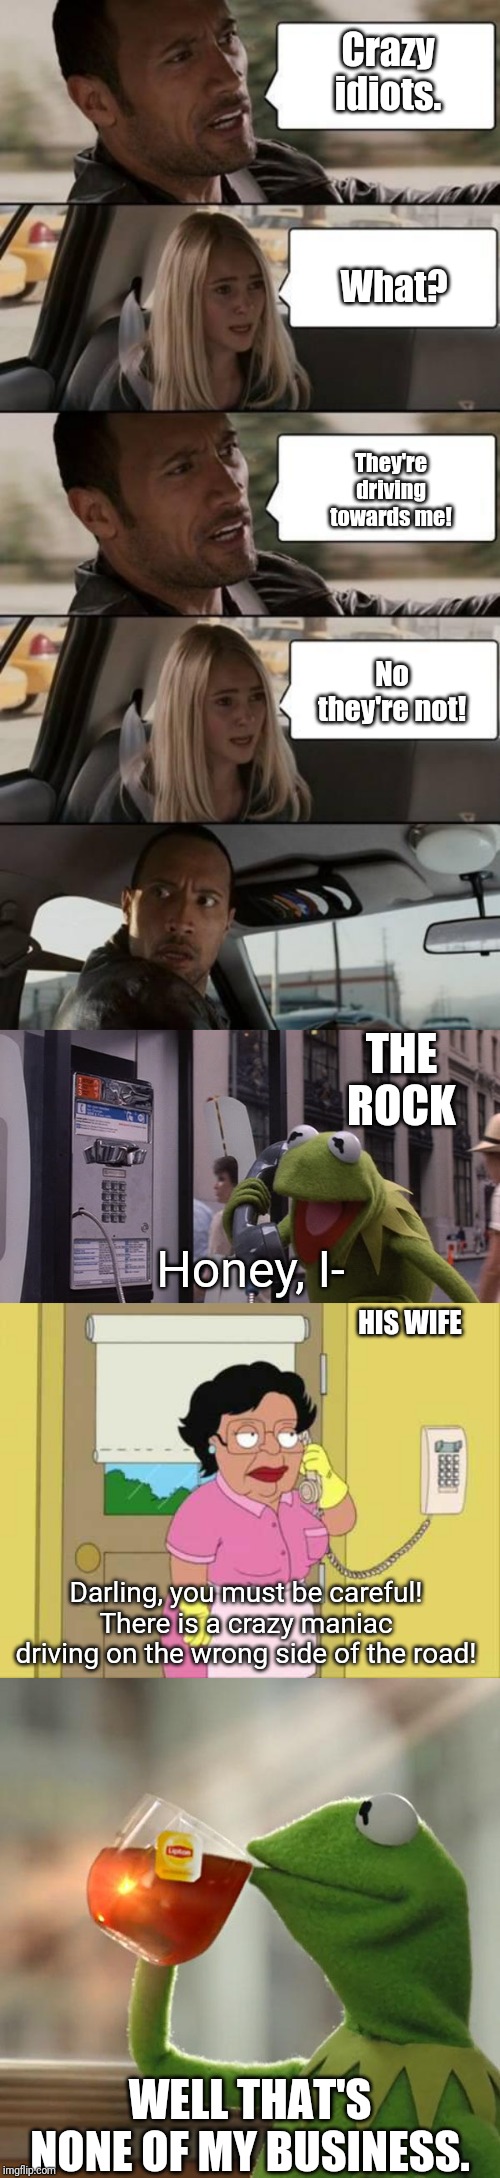 Crazy idiots. What? They're driving towards me! No they're not! THE ROCK; Honey, I-; HIS WIFE; Darling, you must be careful! There is a crazy maniac driving on the wrong side of the road! WELL THAT'S NONE OF MY BUSINESS. | image tagged in memes,consuela,but thats none of my business,the rock driving,kermit phone | made w/ Imgflip meme maker